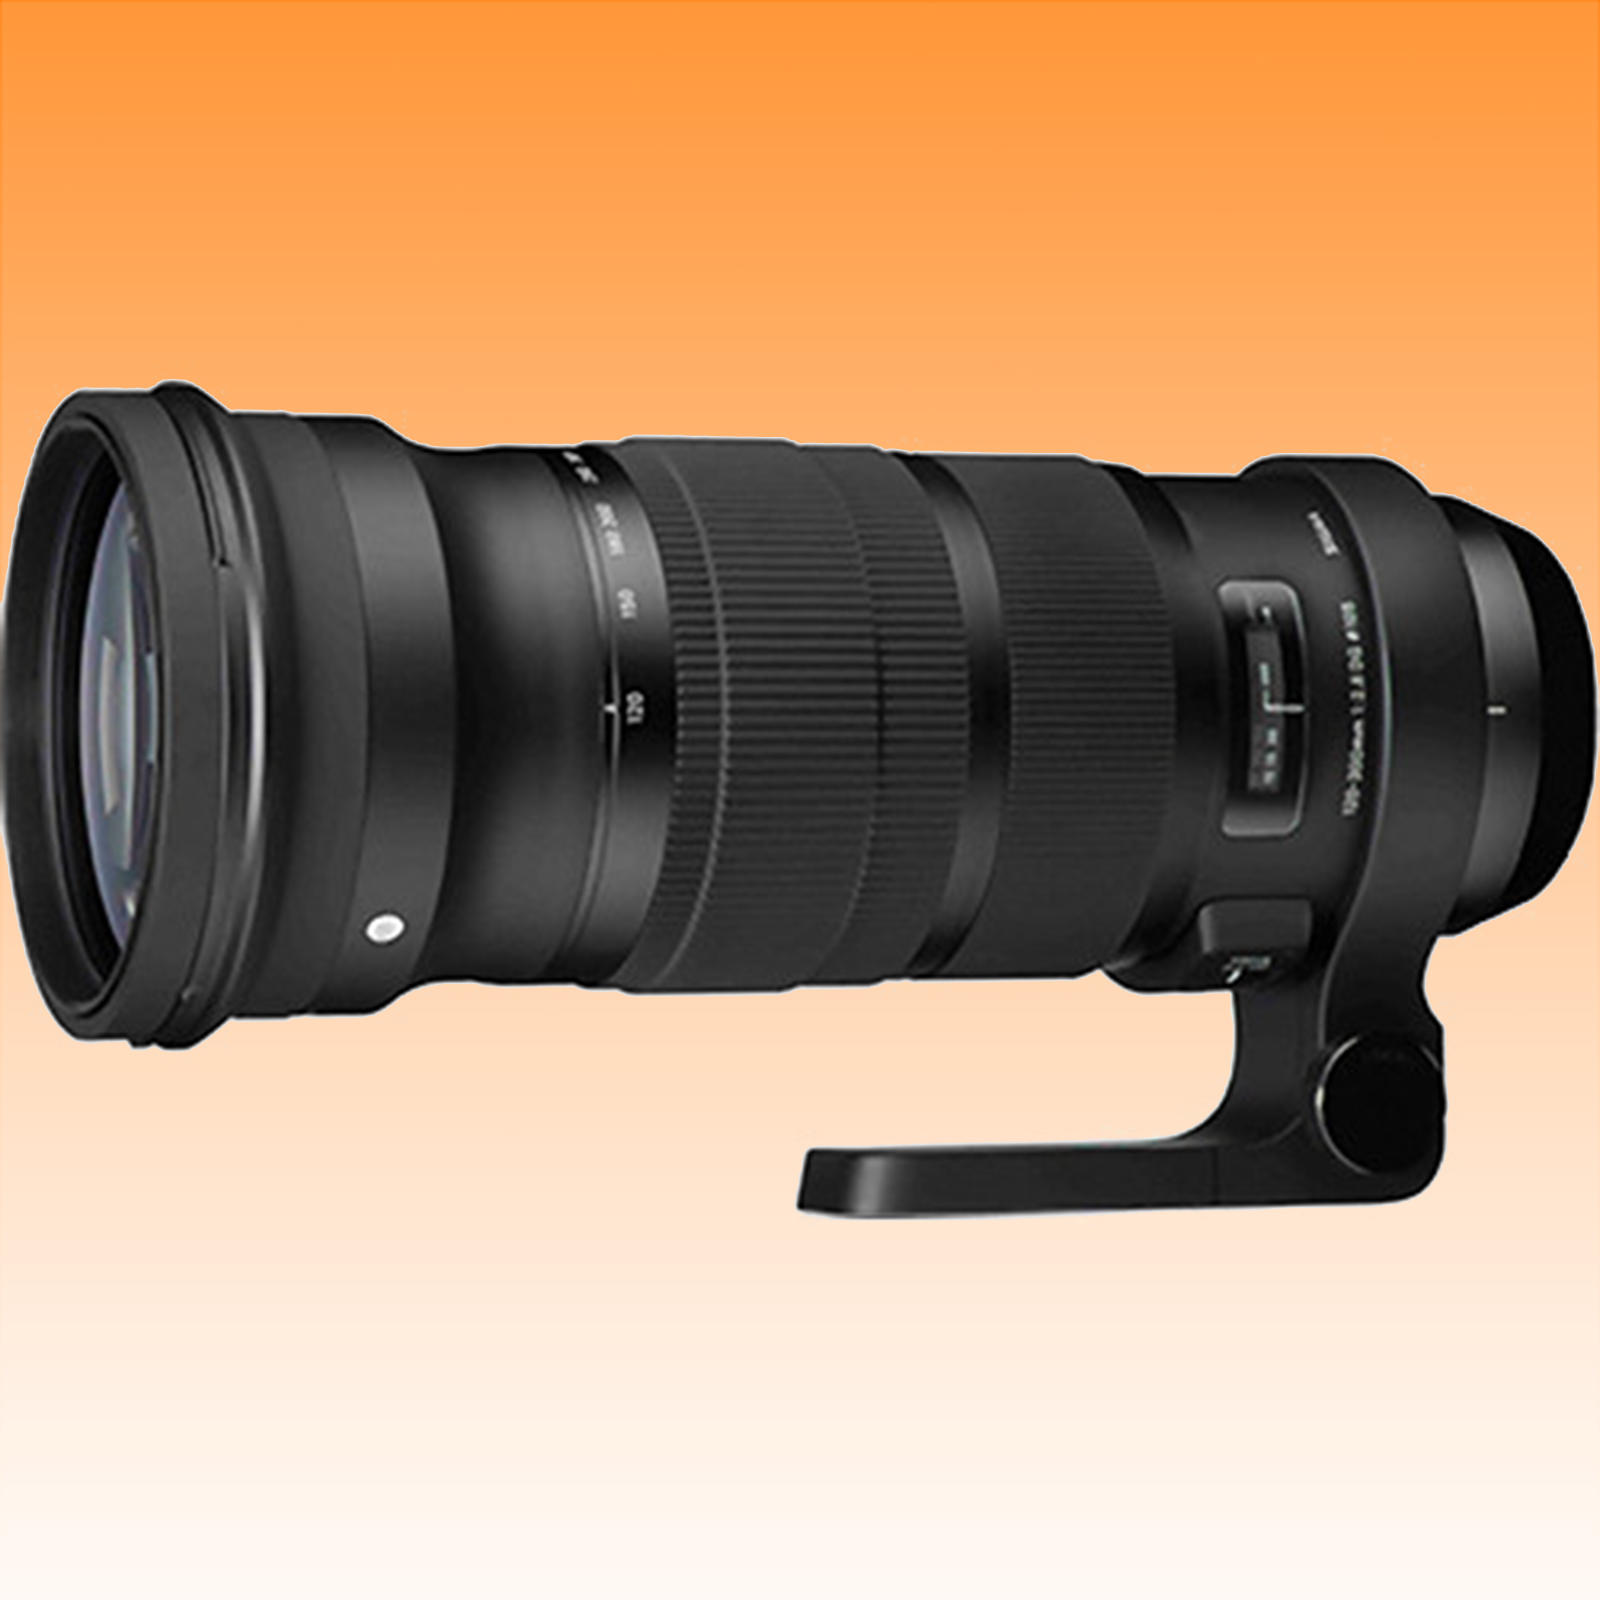 Image of Sigma 120-300mm f/2.8 DG OS HSM Sports Lens for Canon EF - Brand New